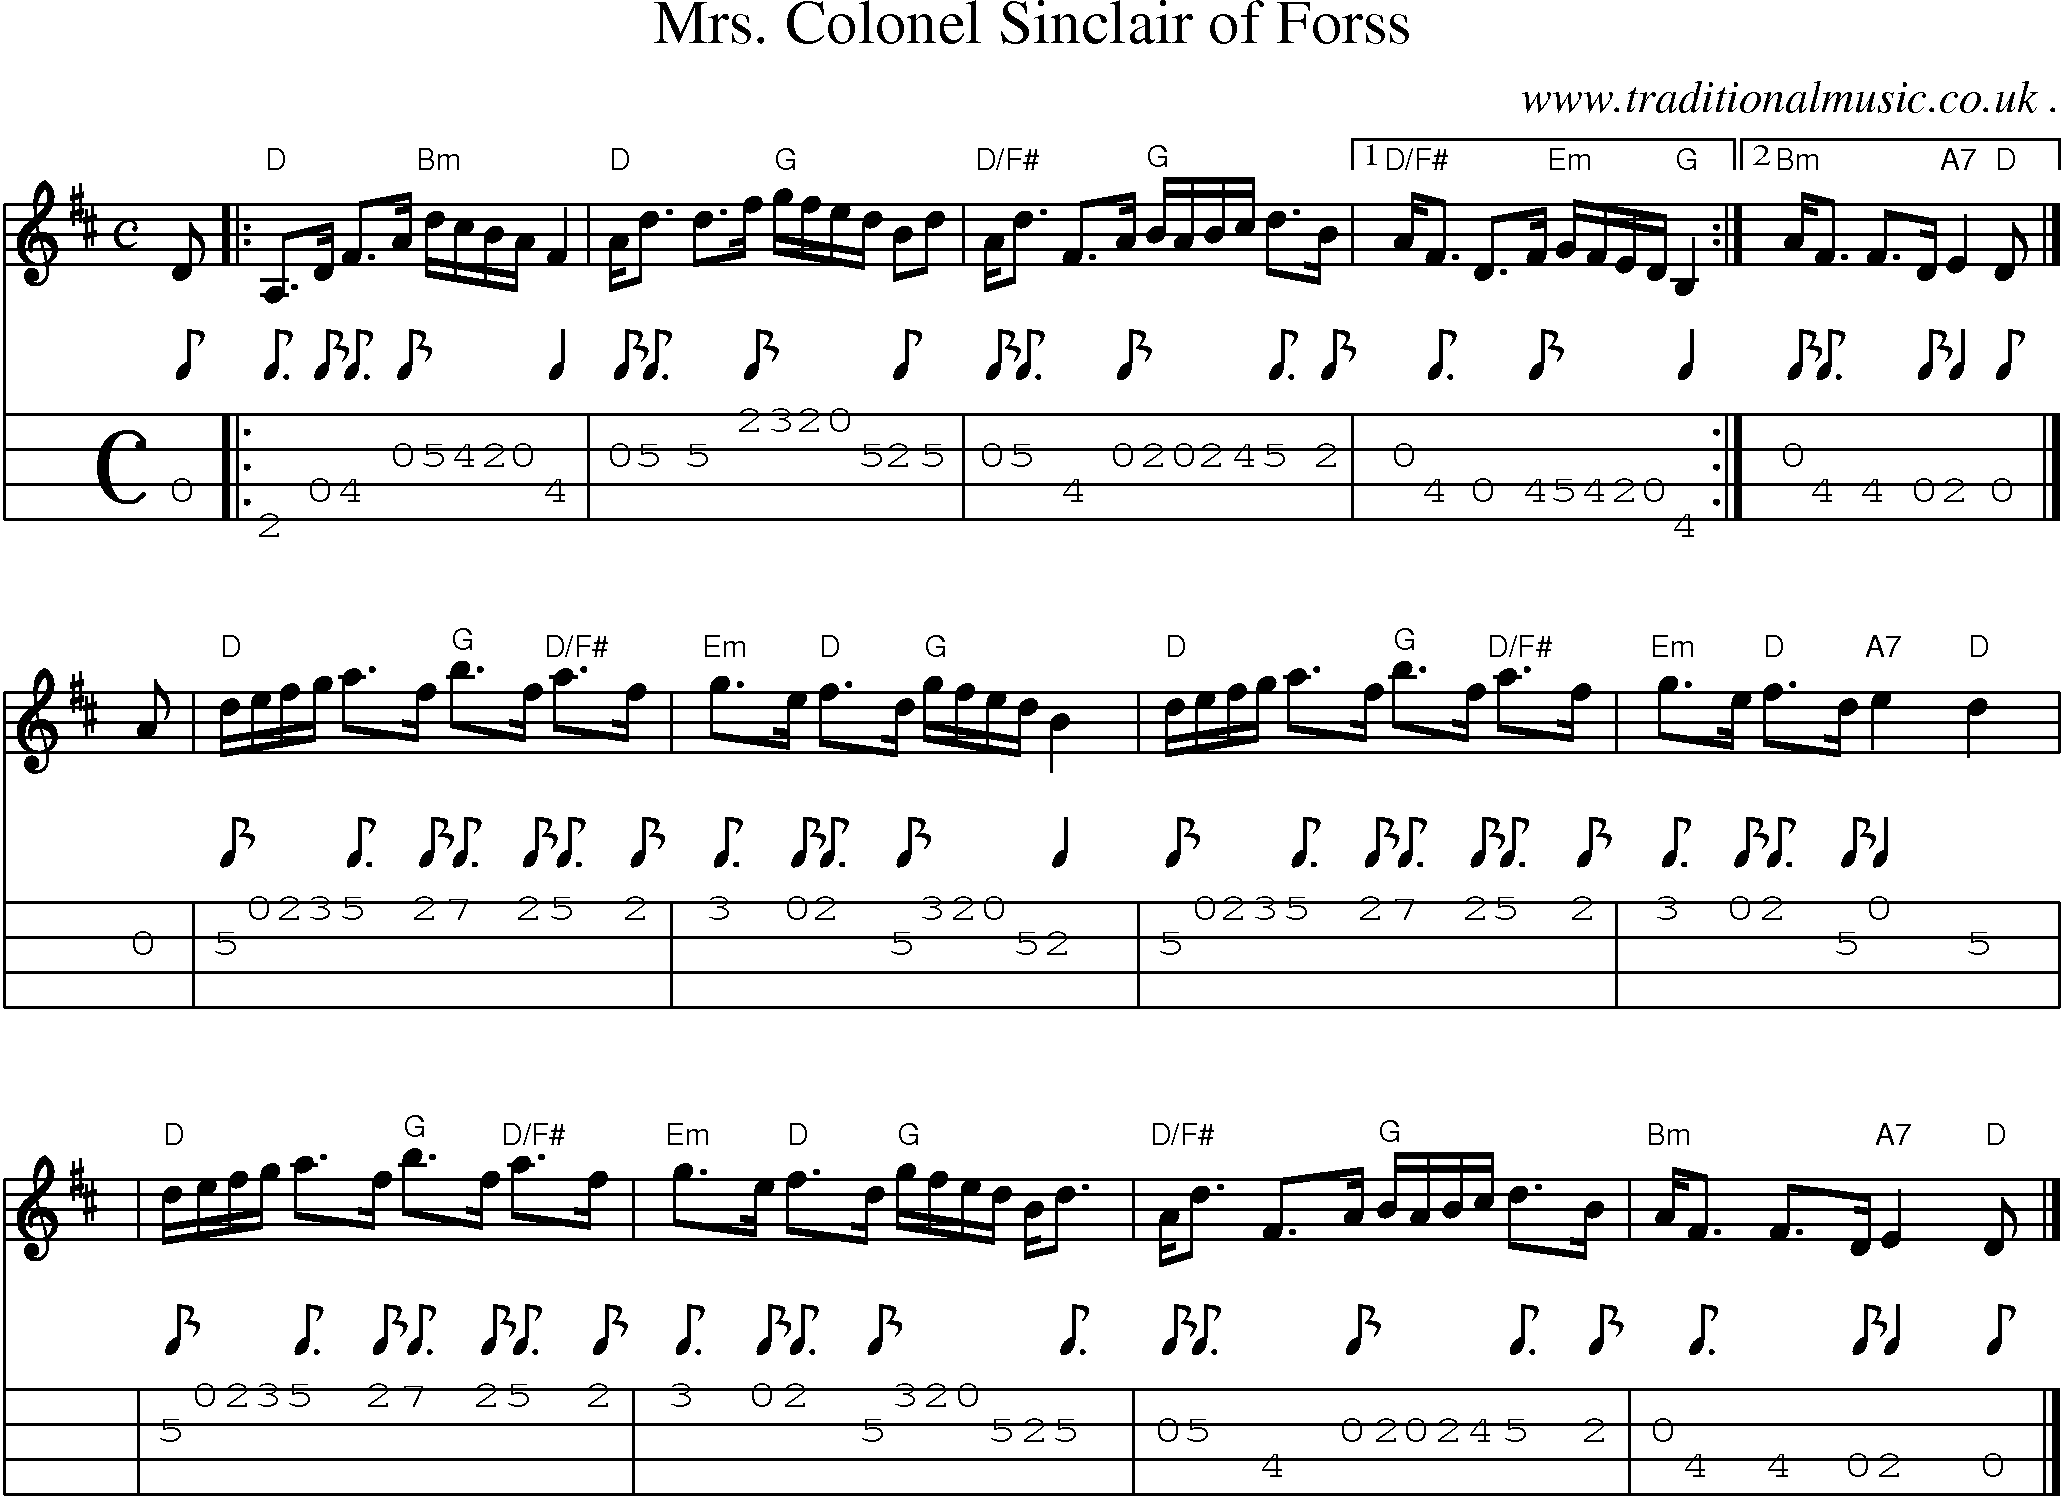 Sheet-music  score, Chords and Mandolin Tabs for Mrs Colonel Sinclair Of Forss